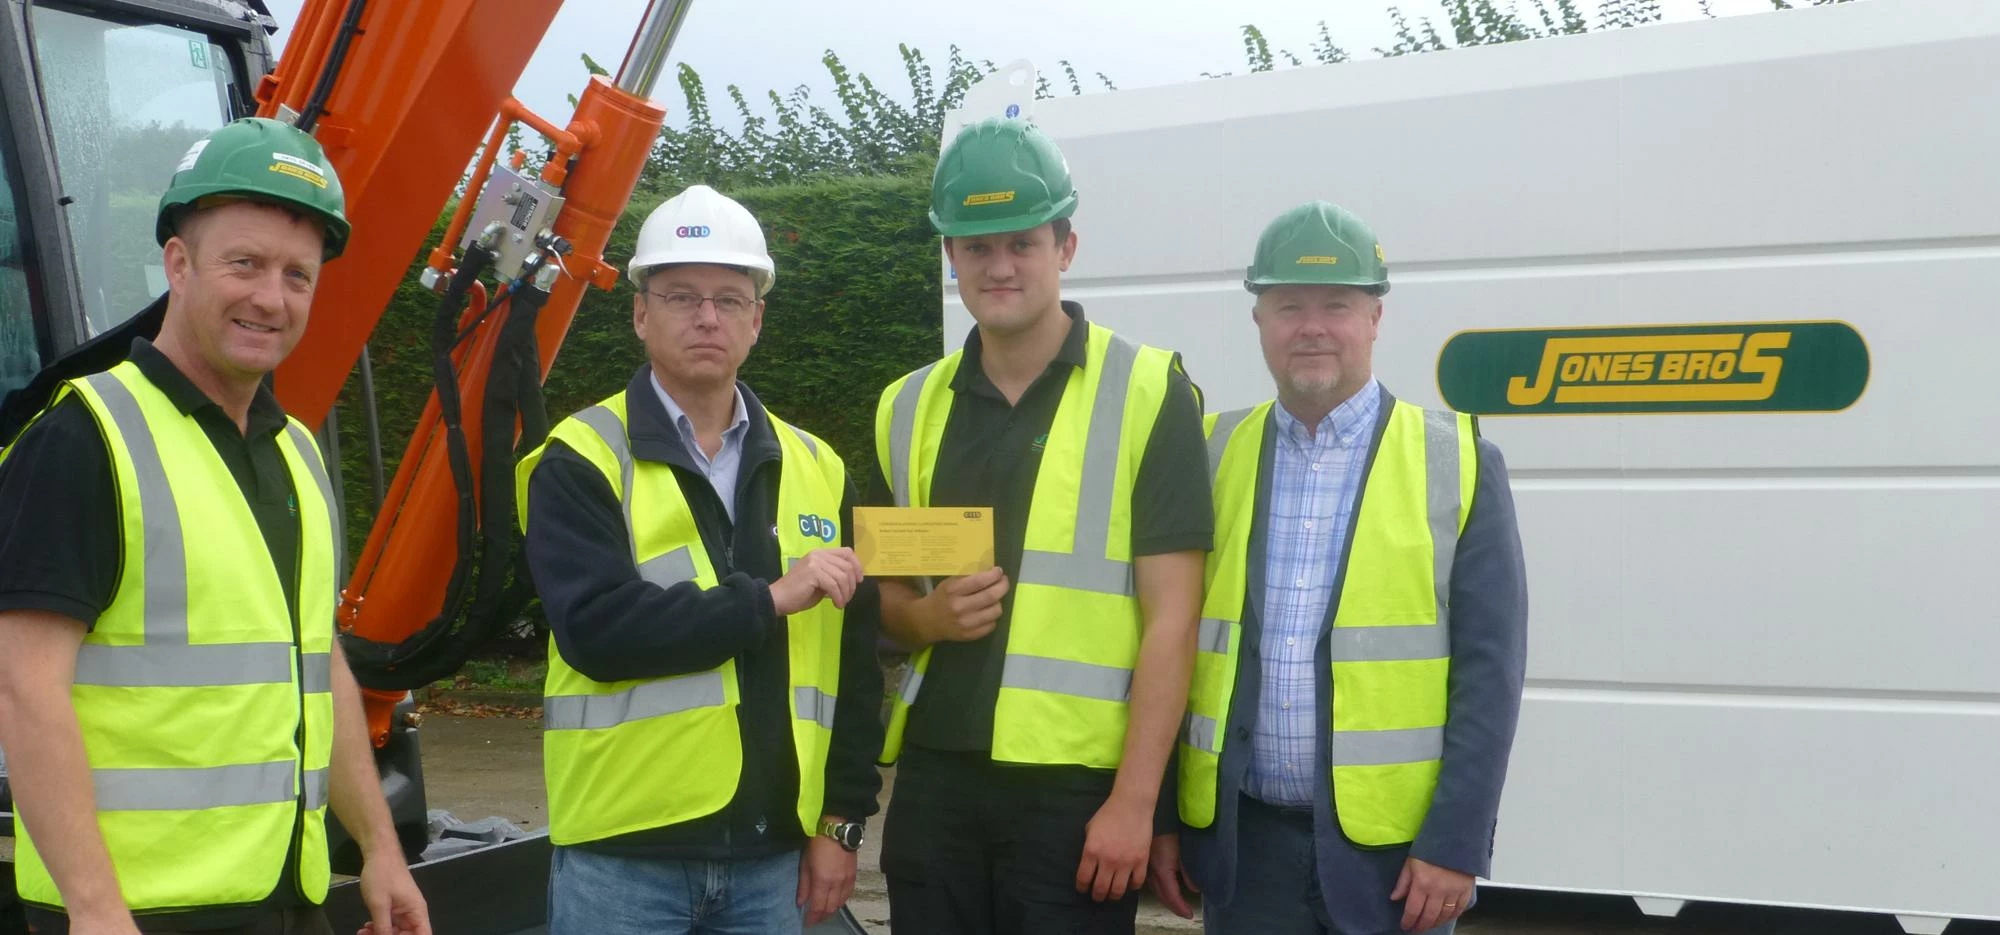 Geraint receives his nomination from the CITB 